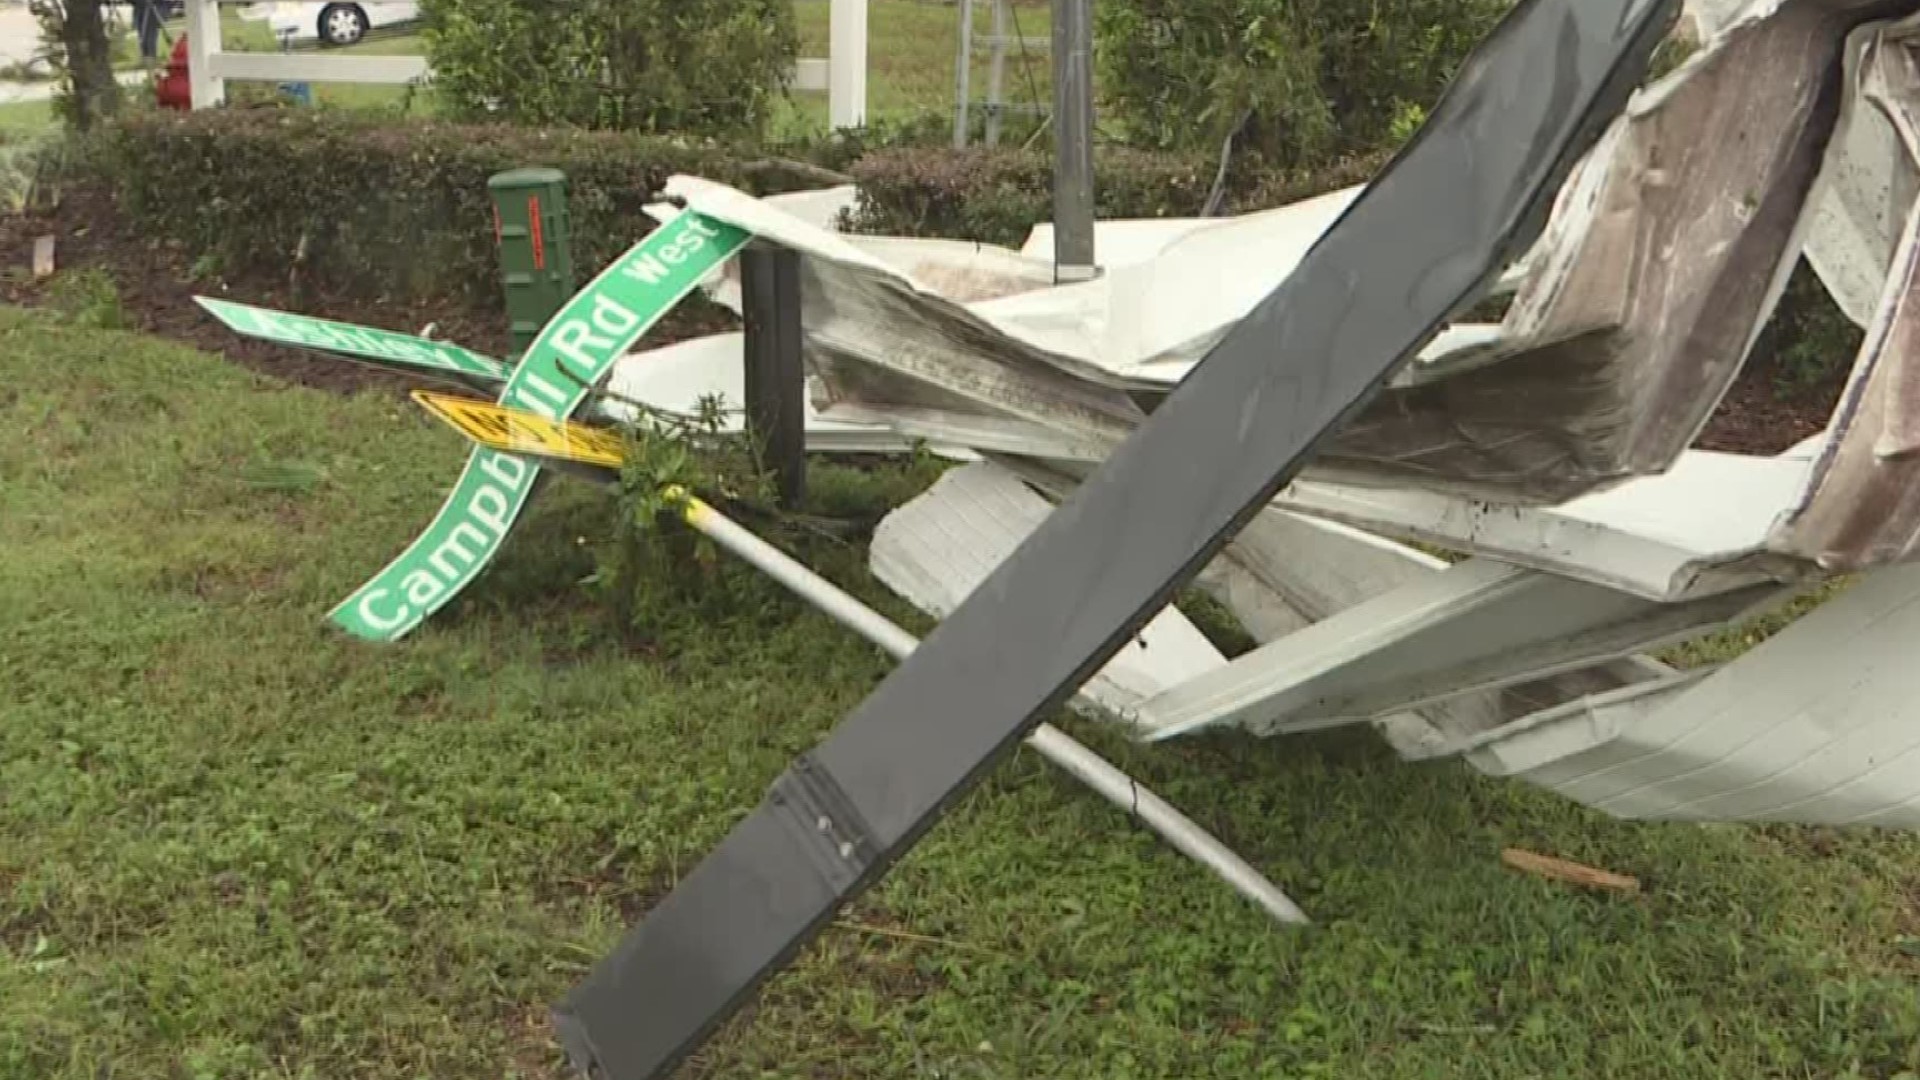 The aftermath of the tornado that hit Polk County, Florida Friday night could be seen everywhere along West Campbell Road.